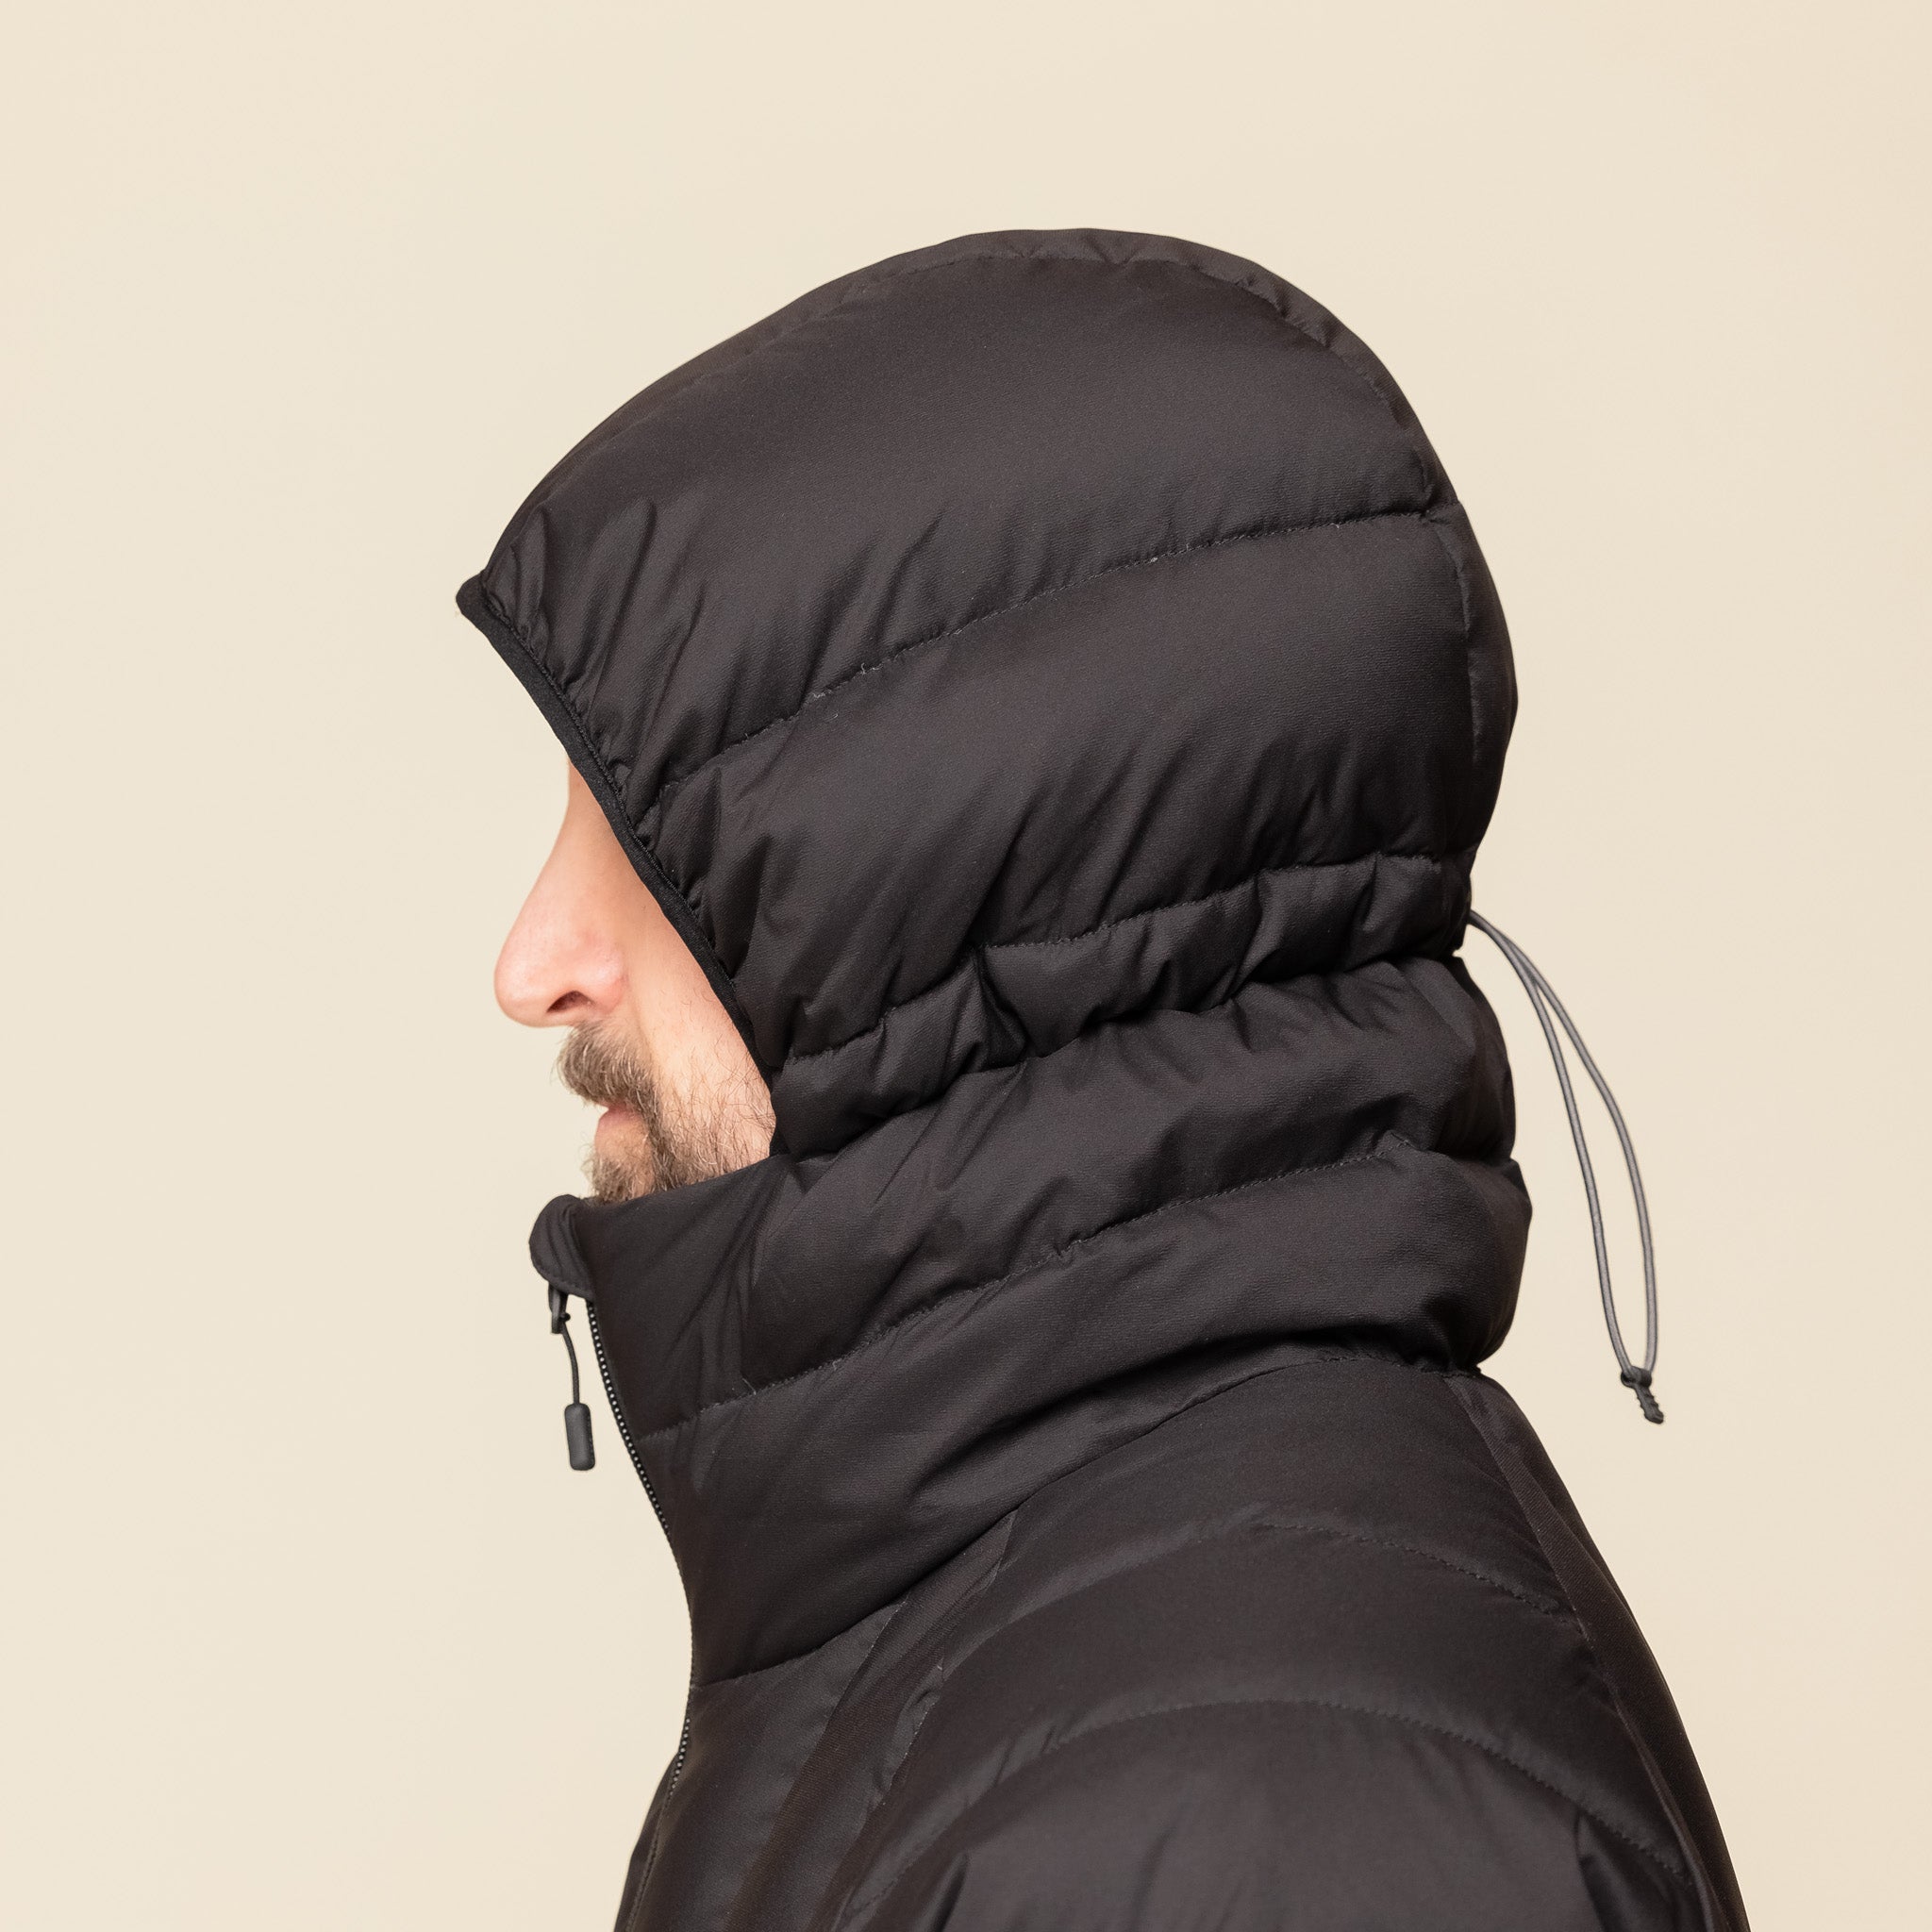 Tightbooth - Light Down Jacket - Black "tightbooth stockists" "tightbooth Japan"